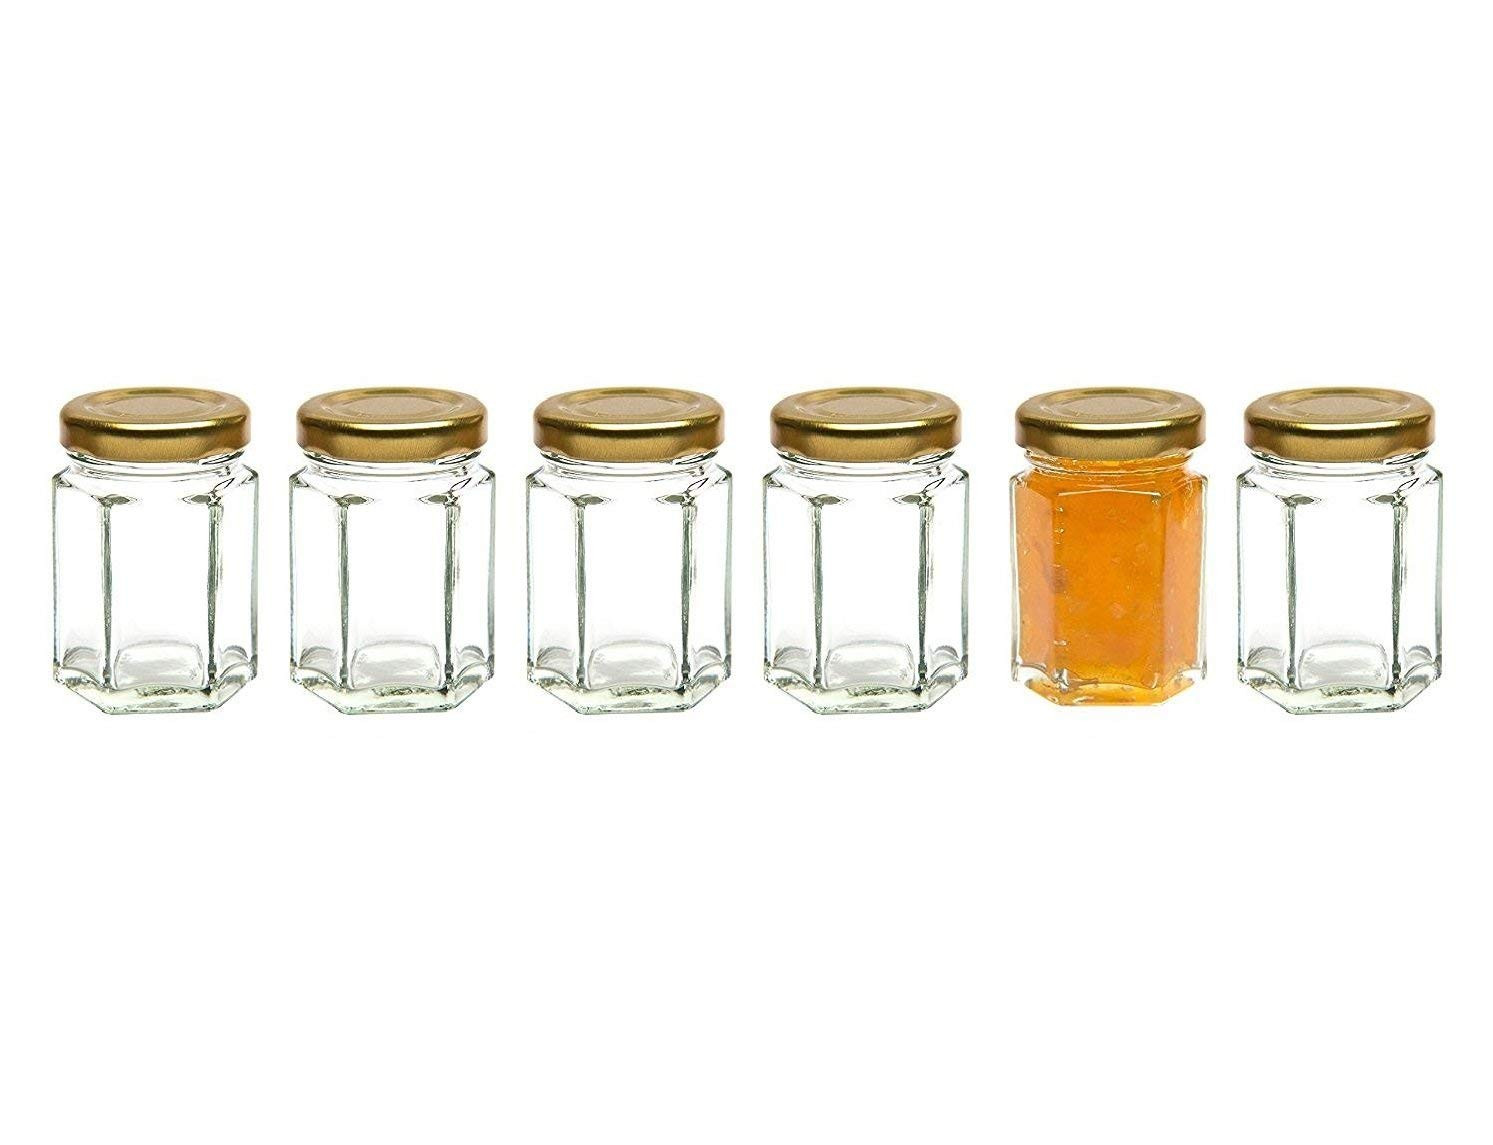 13 Perfect Small Glass Bottle Vases 2024 free download small glass bottle vases of amazon com healthcom 6 pcs 2 8 oz hexagonal canning jars wide mouth with amazon com healthcom 6 pcs 2 8 oz hexagonal canning jars wide mouth quart jam jars hexago